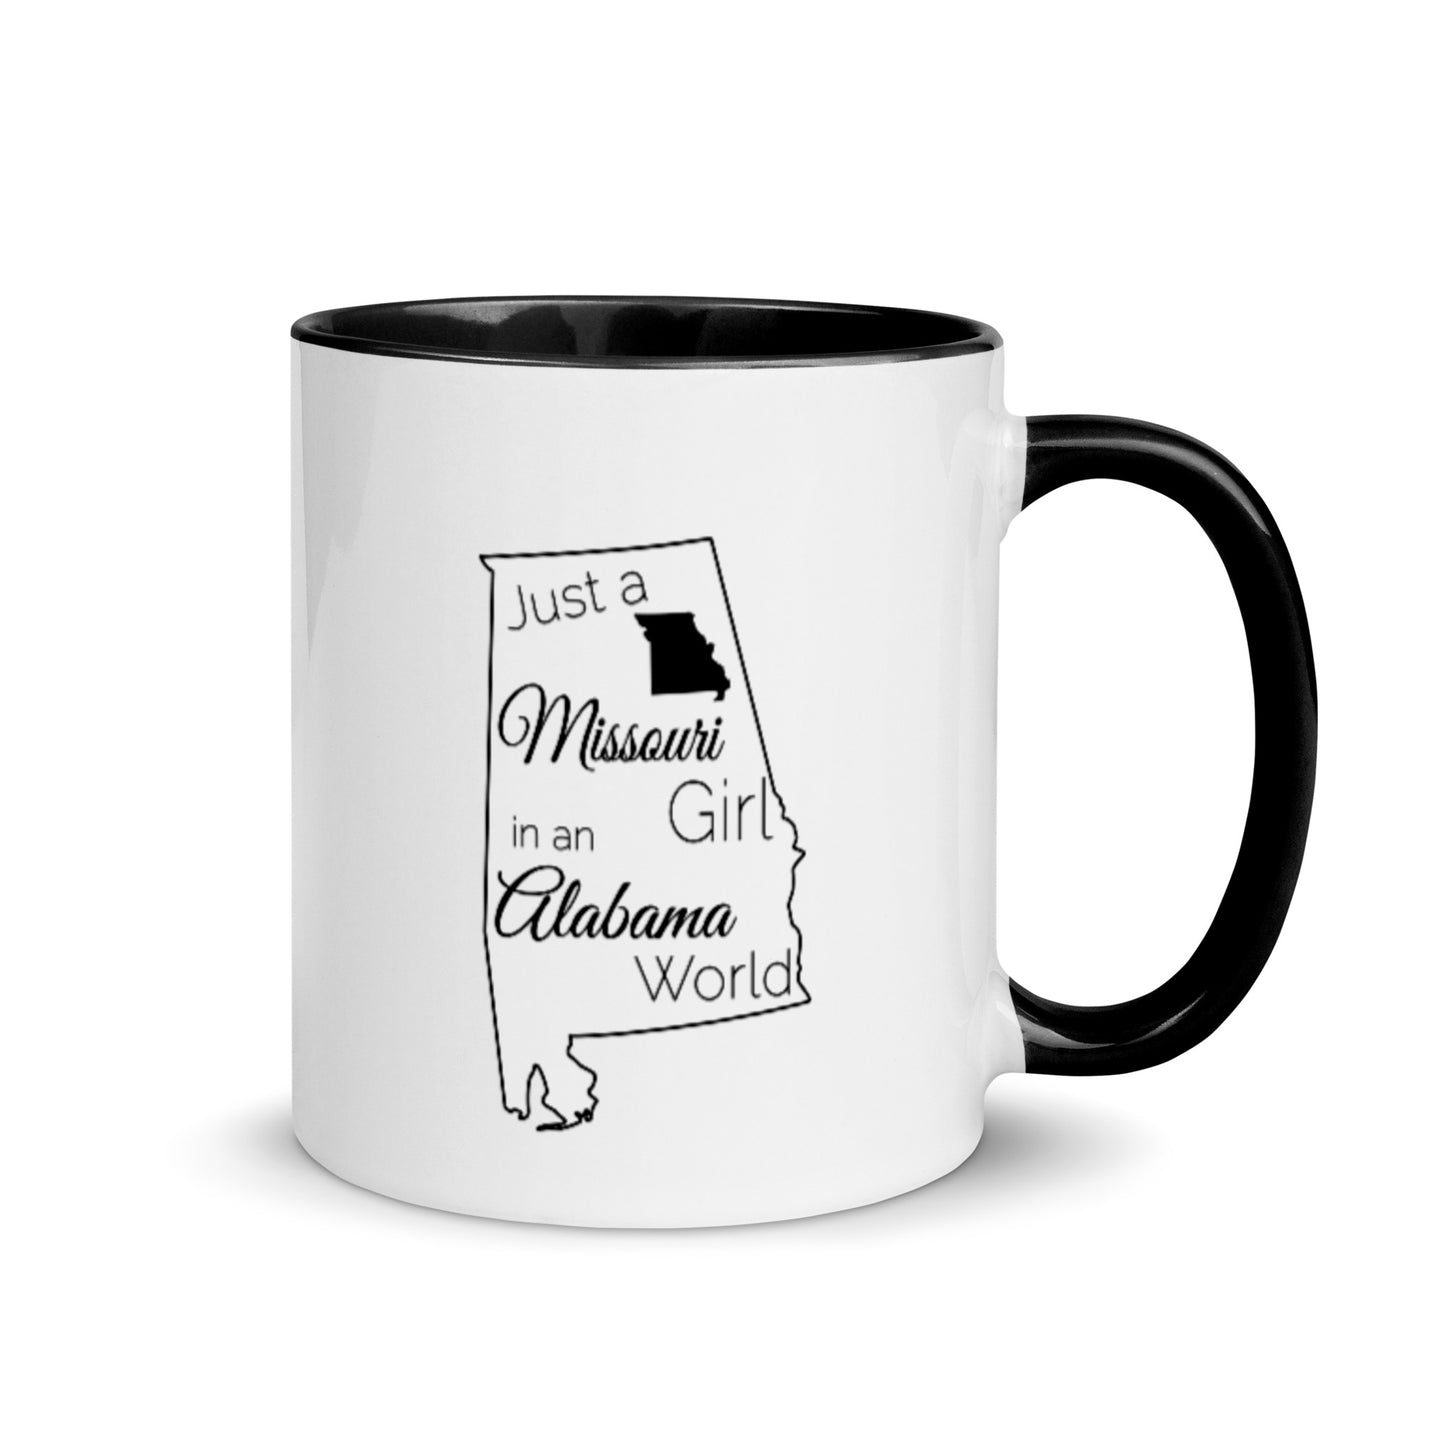 Just a Missouri Girl in an Alabama World Mug with Color Inside